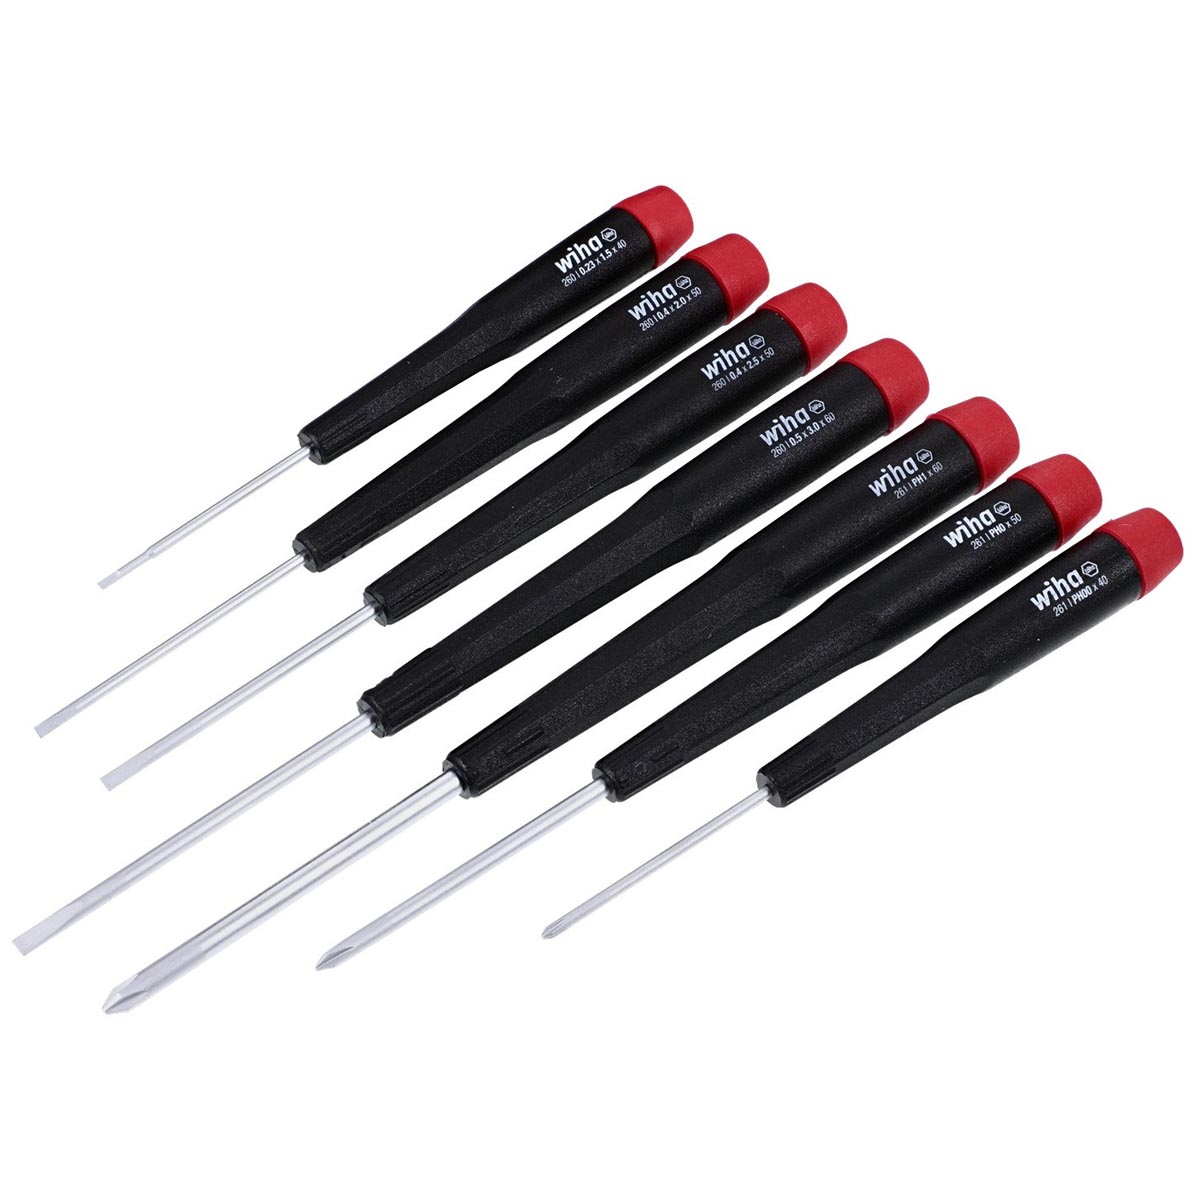 Wiha Precision Long Slotted/Phillips Screwdrivers (7 Piece Set)